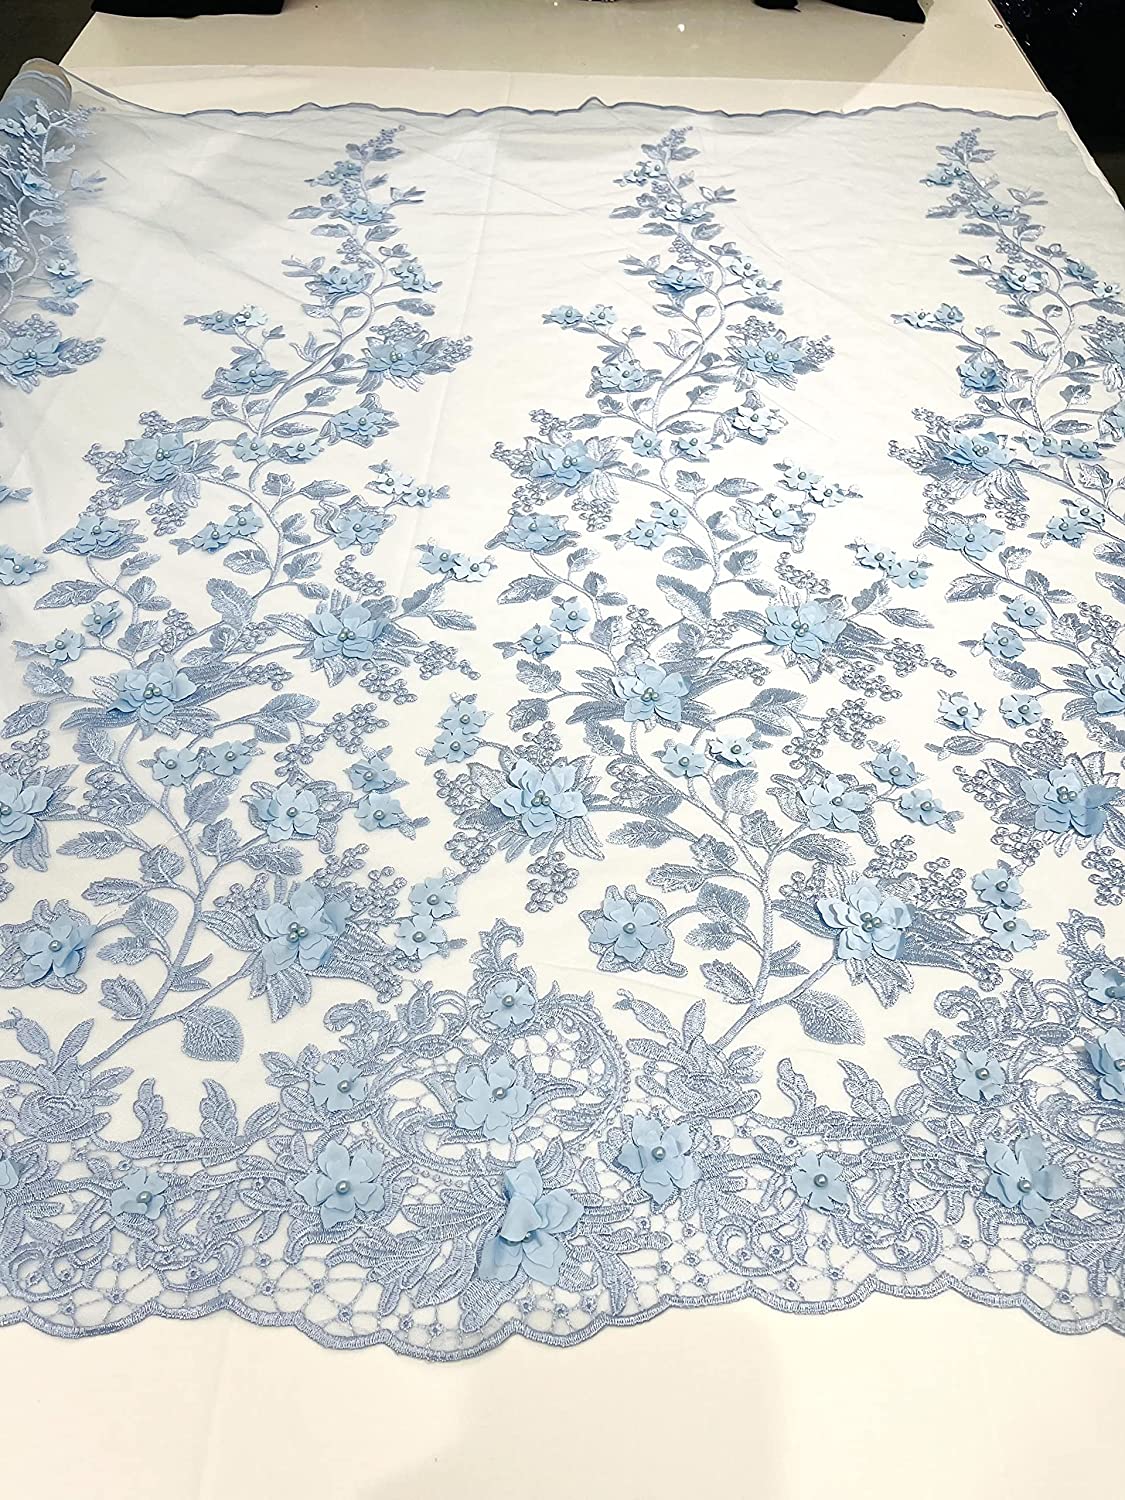 Emily 3-D Floral Design Embroider with Pearls On A Mesh Lace Fabric (1 Yard, Light Blue)